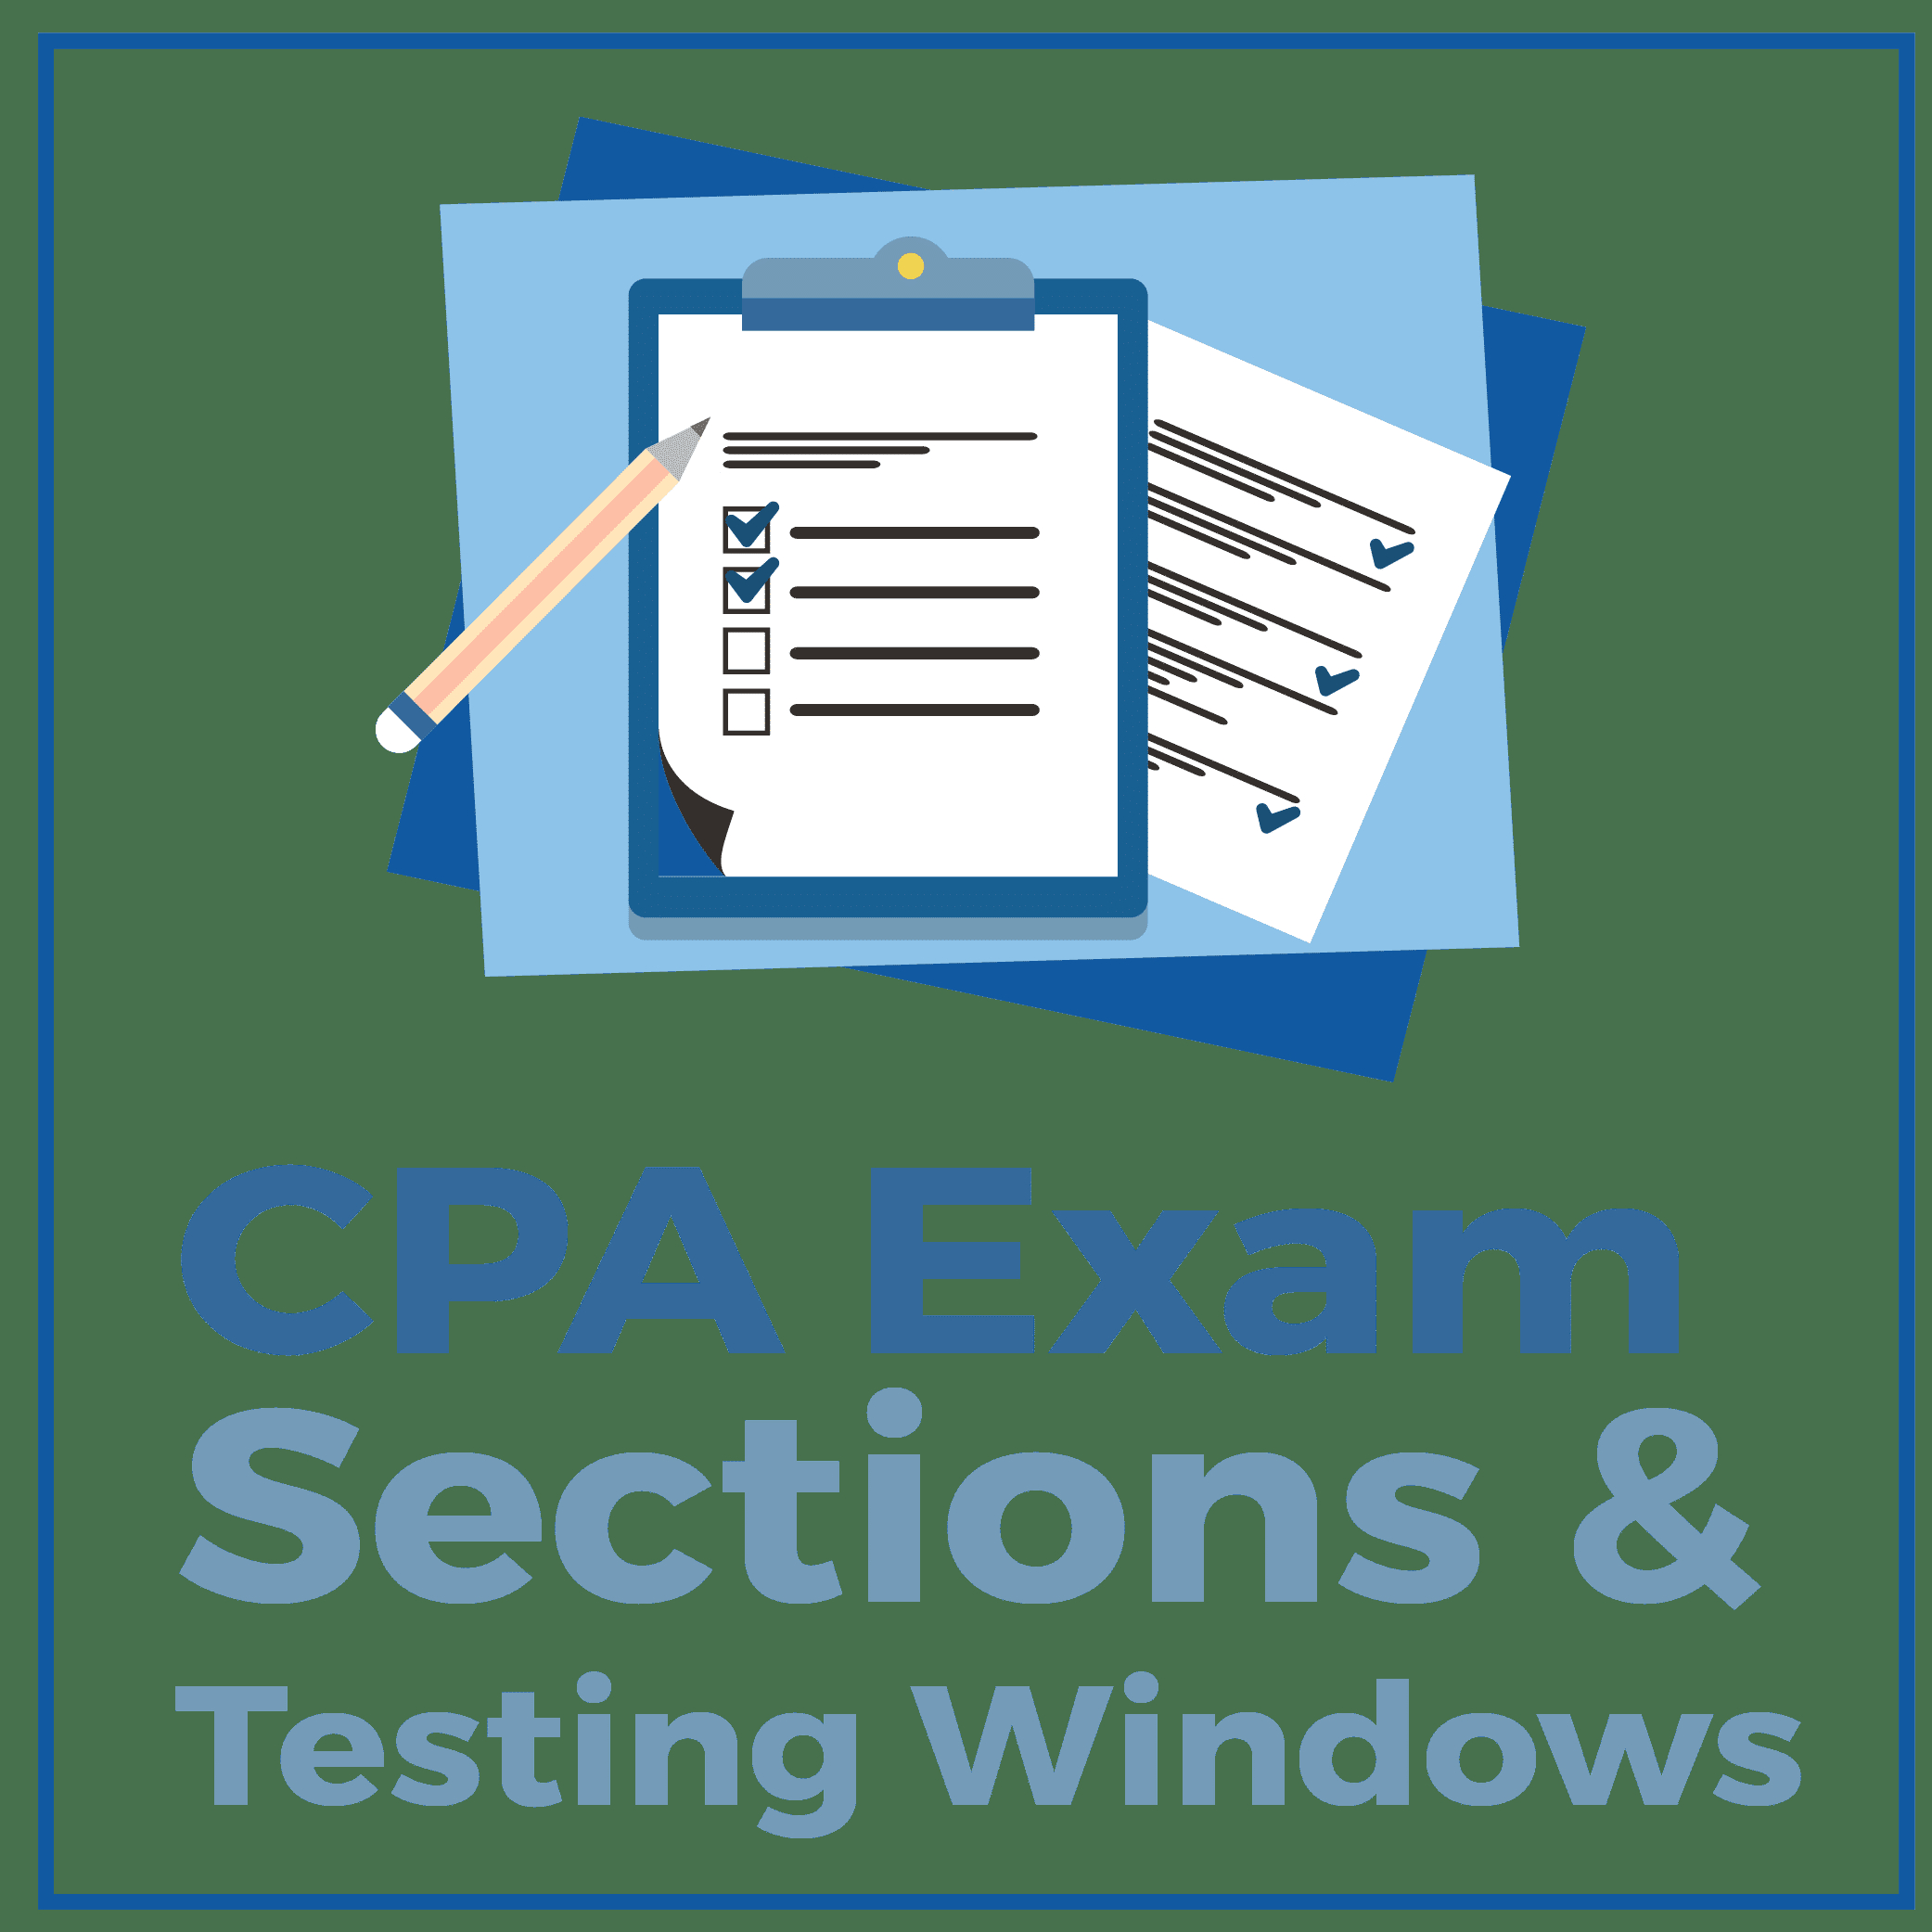 2020 Cpa Exam Sections Testing Windows Aud Bec Far Reg with size 2083 X 2083